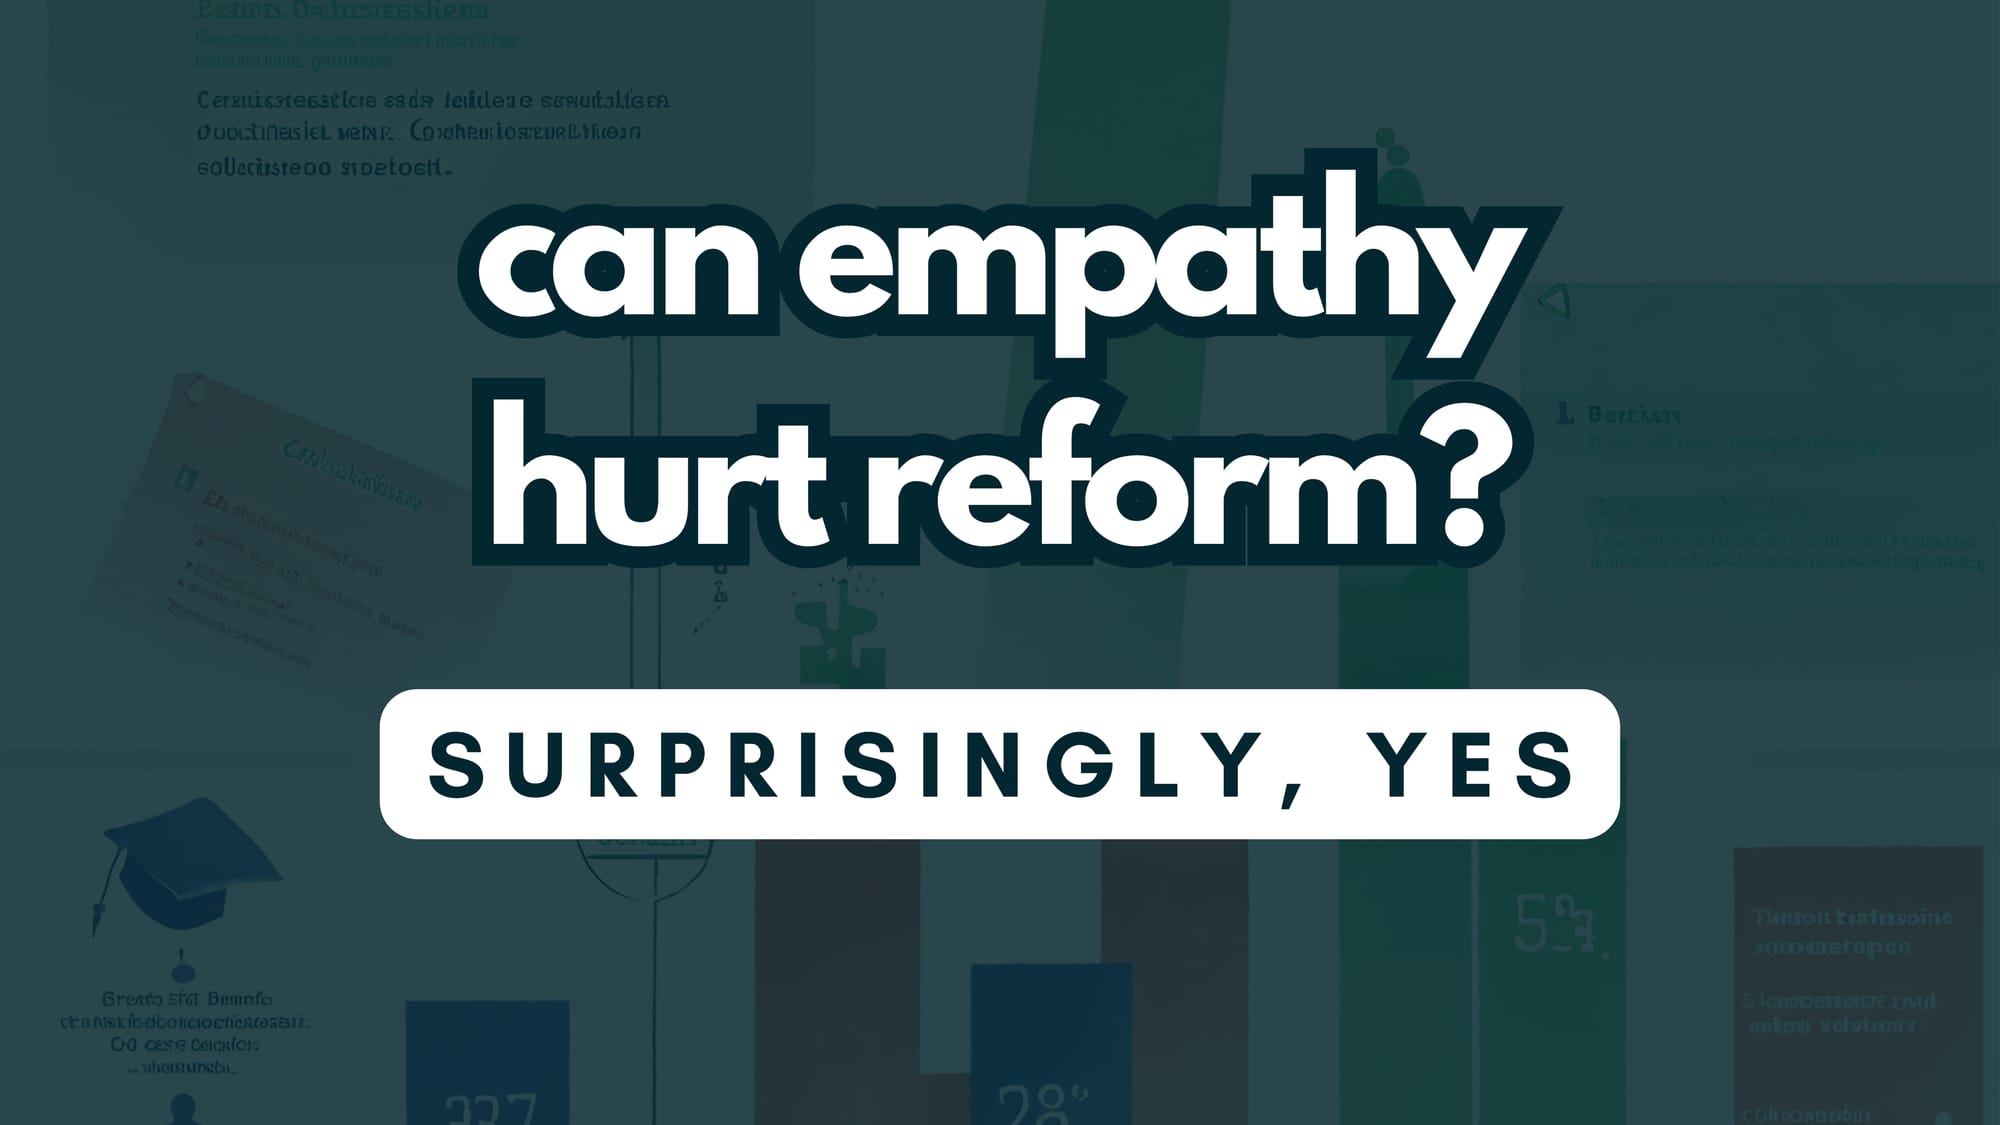 Can empathy hurt reform? Surprisingly, yes.